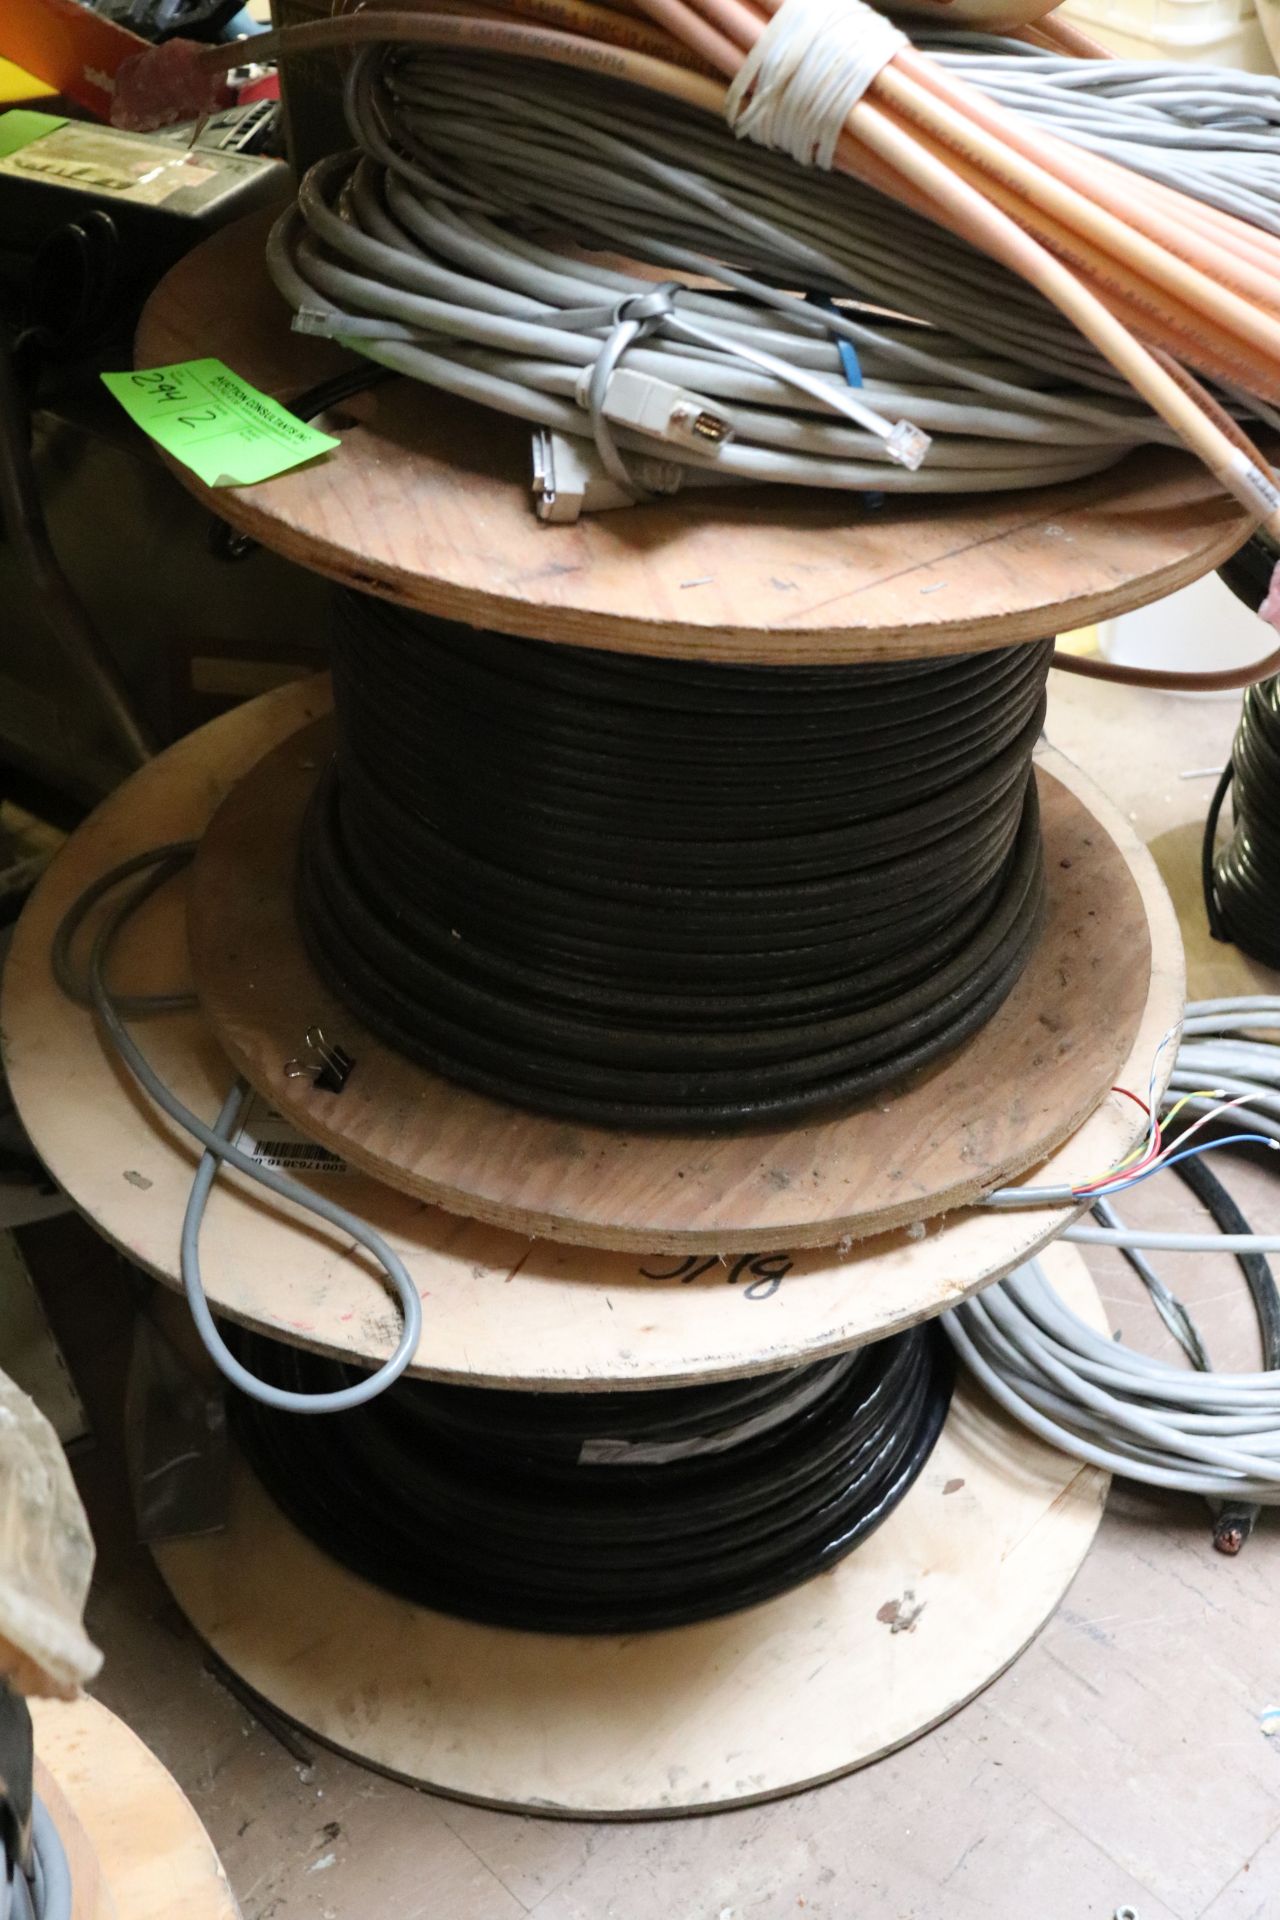 Two spools of copper wire